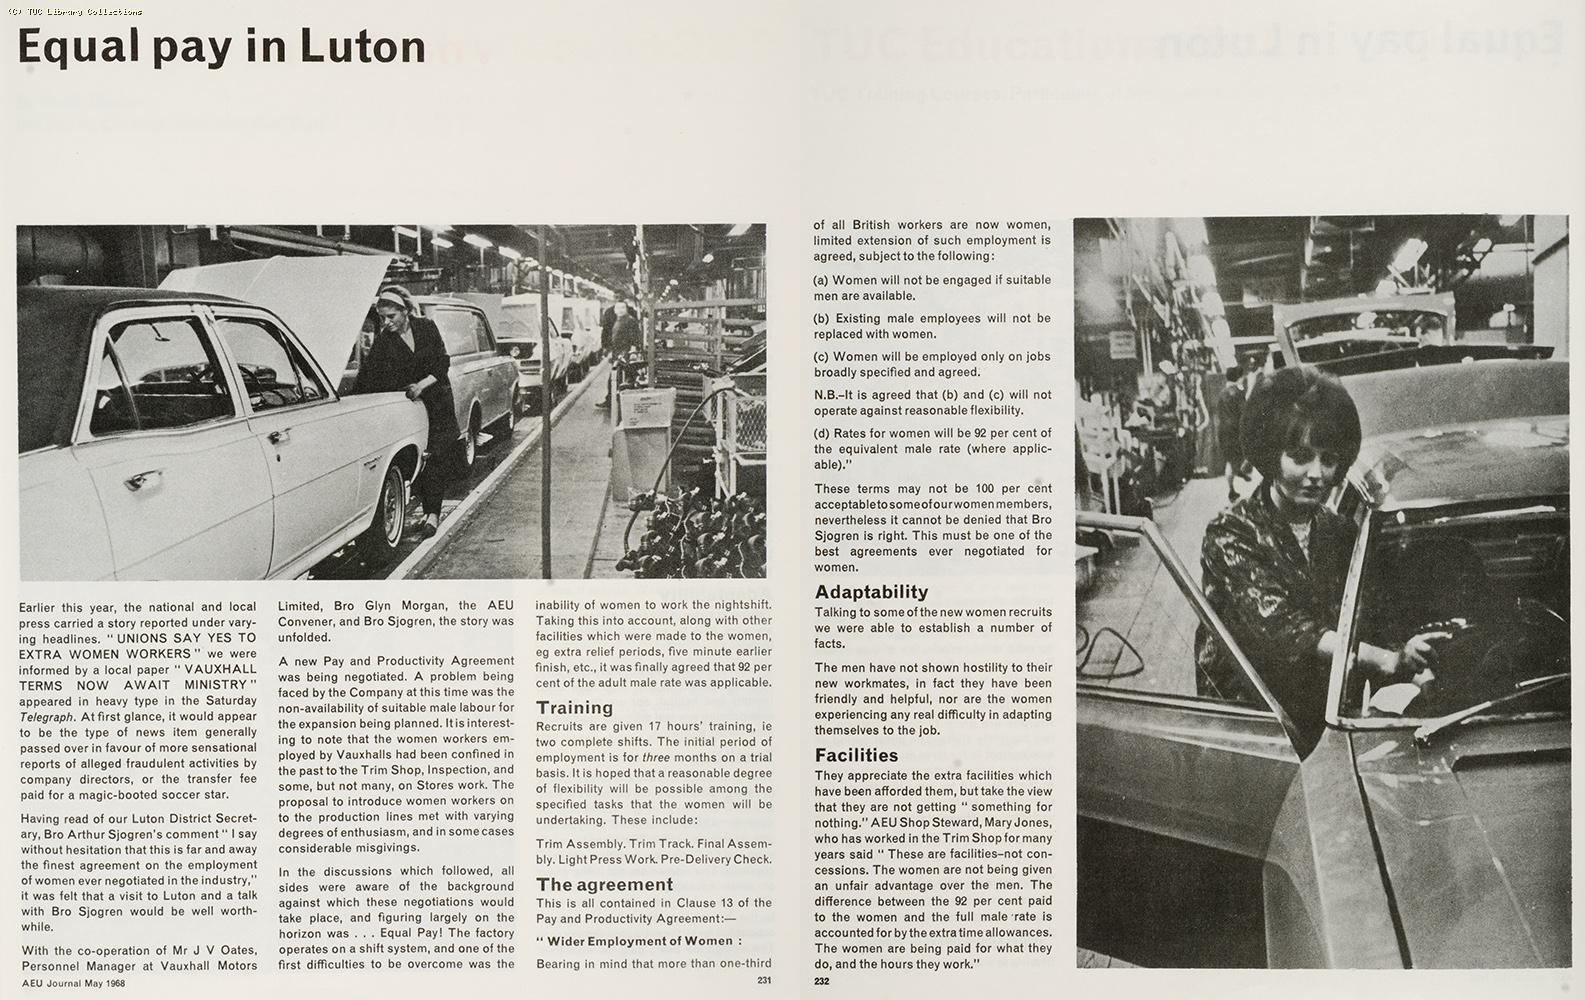 Equal pay in Luton, 1968